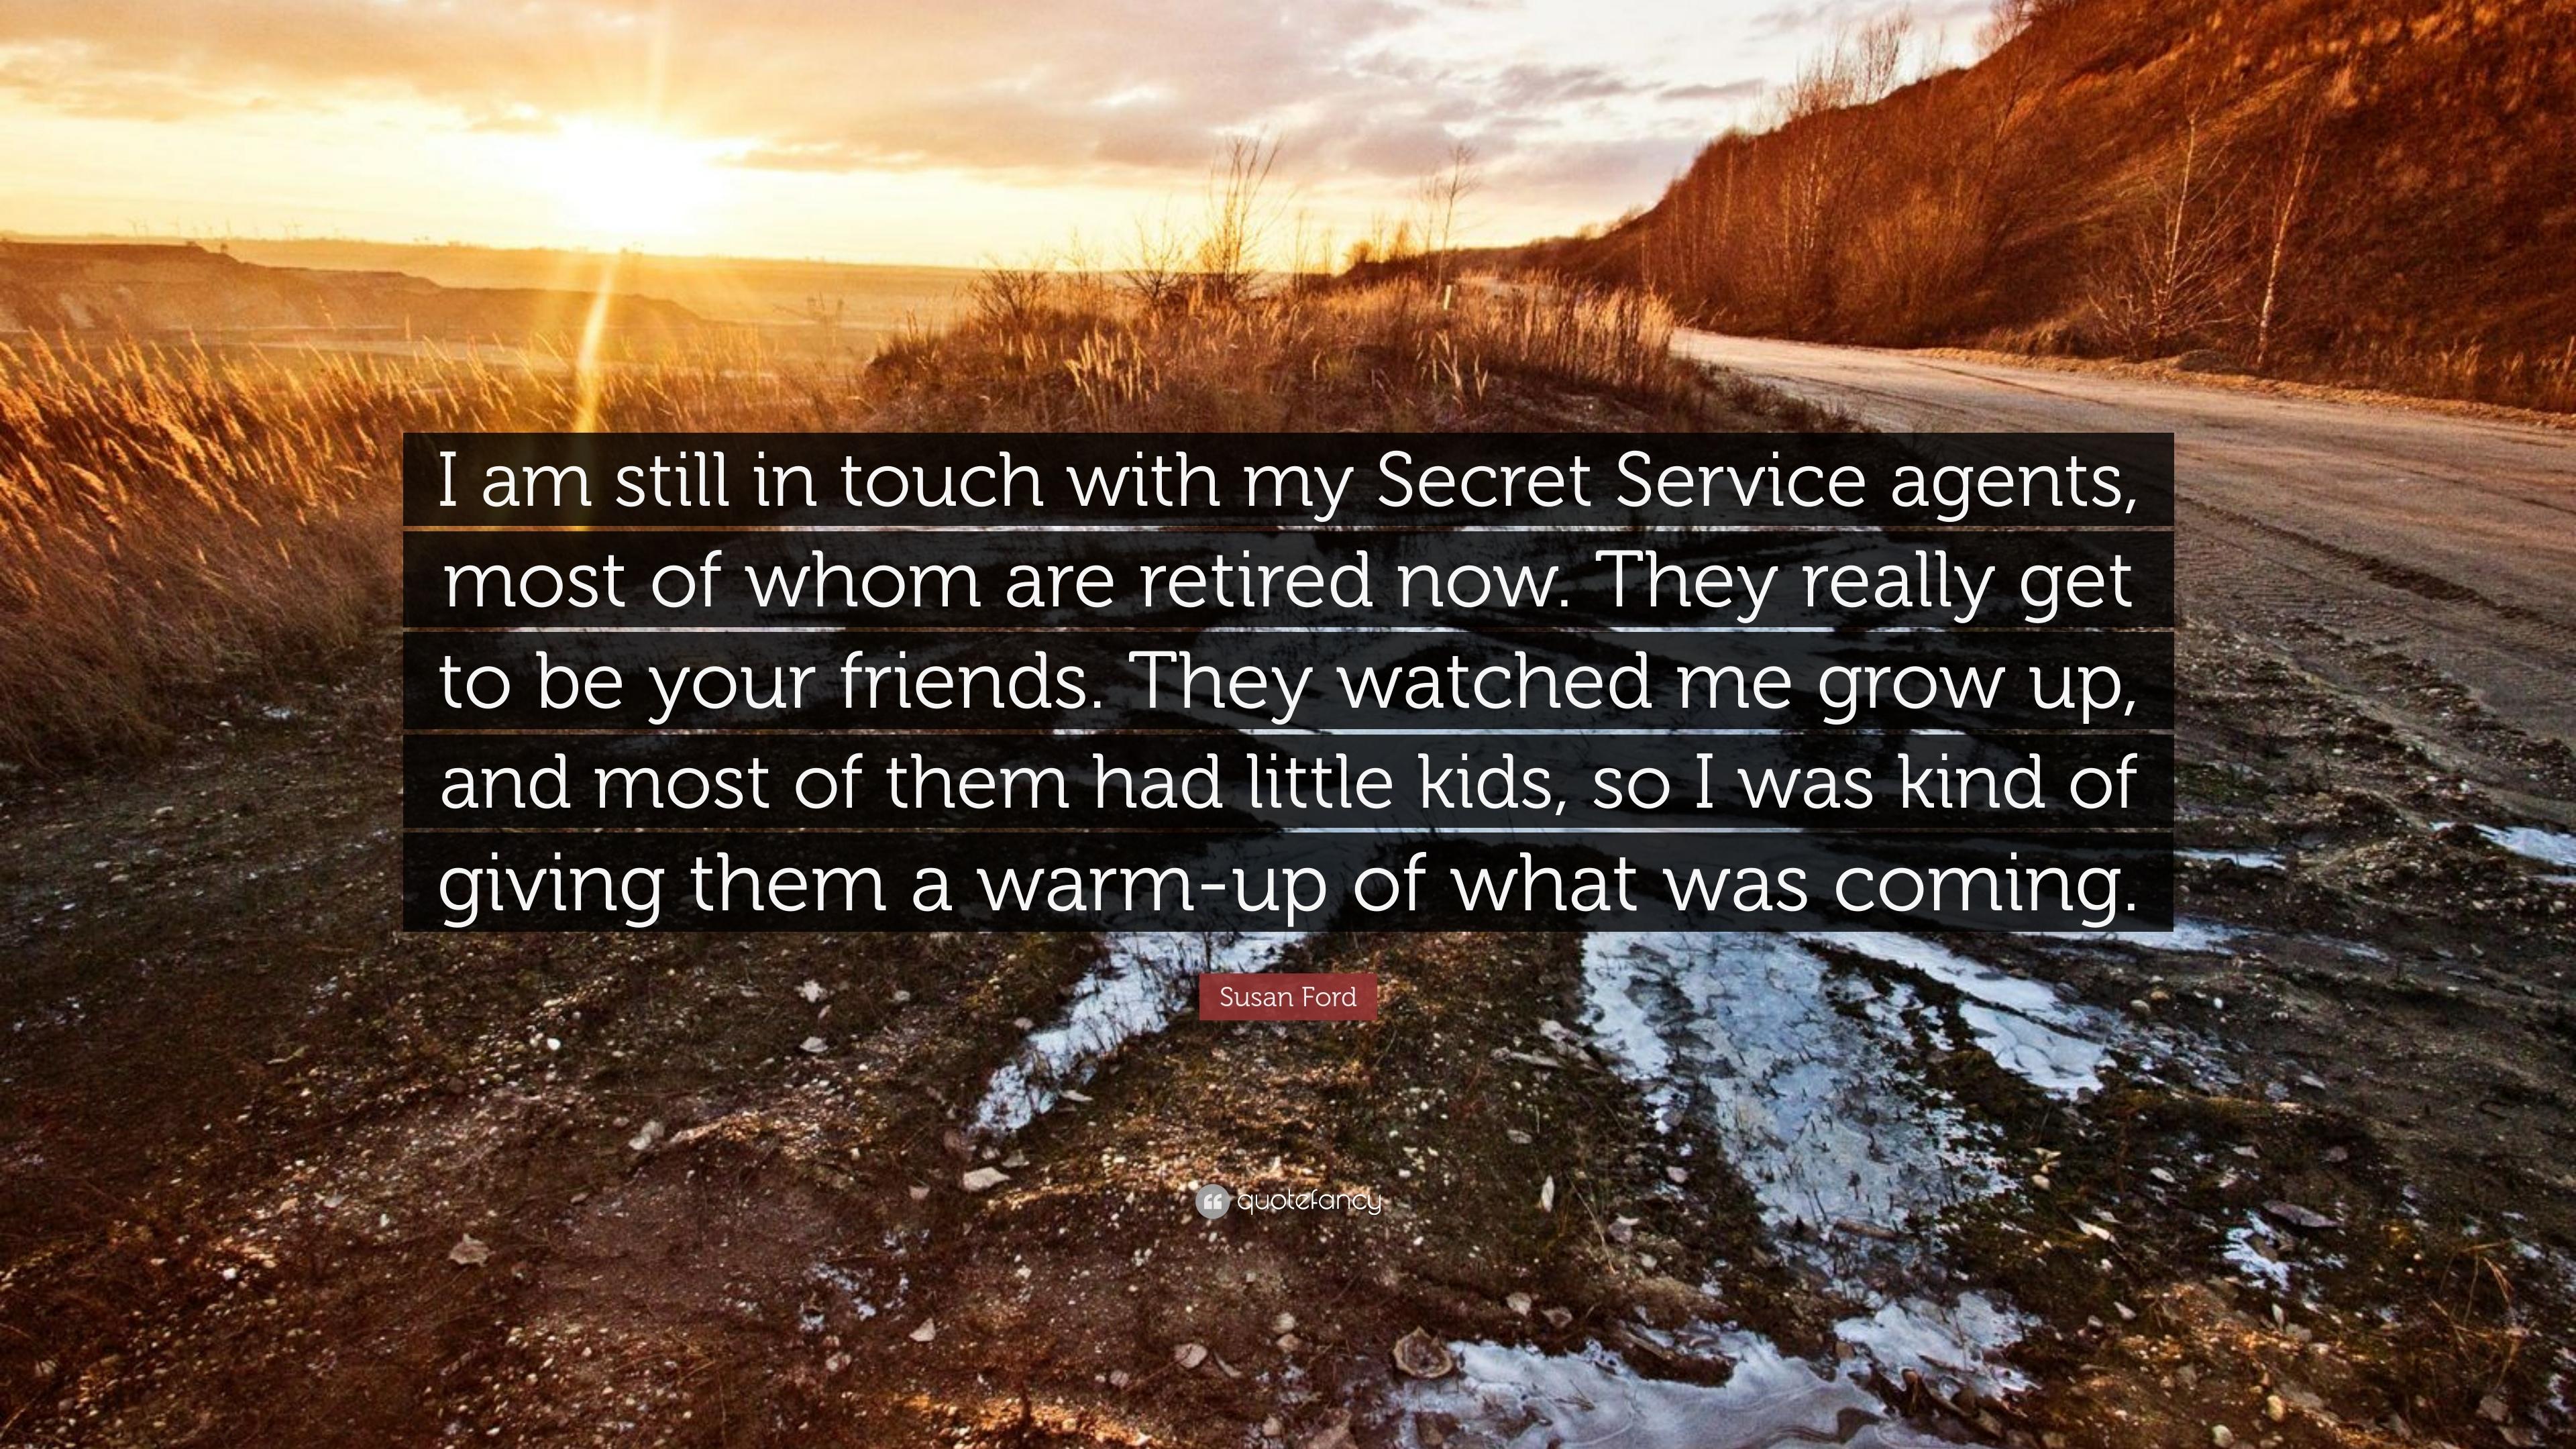 Susan Ford Quote: “I am still in touch with my Secret